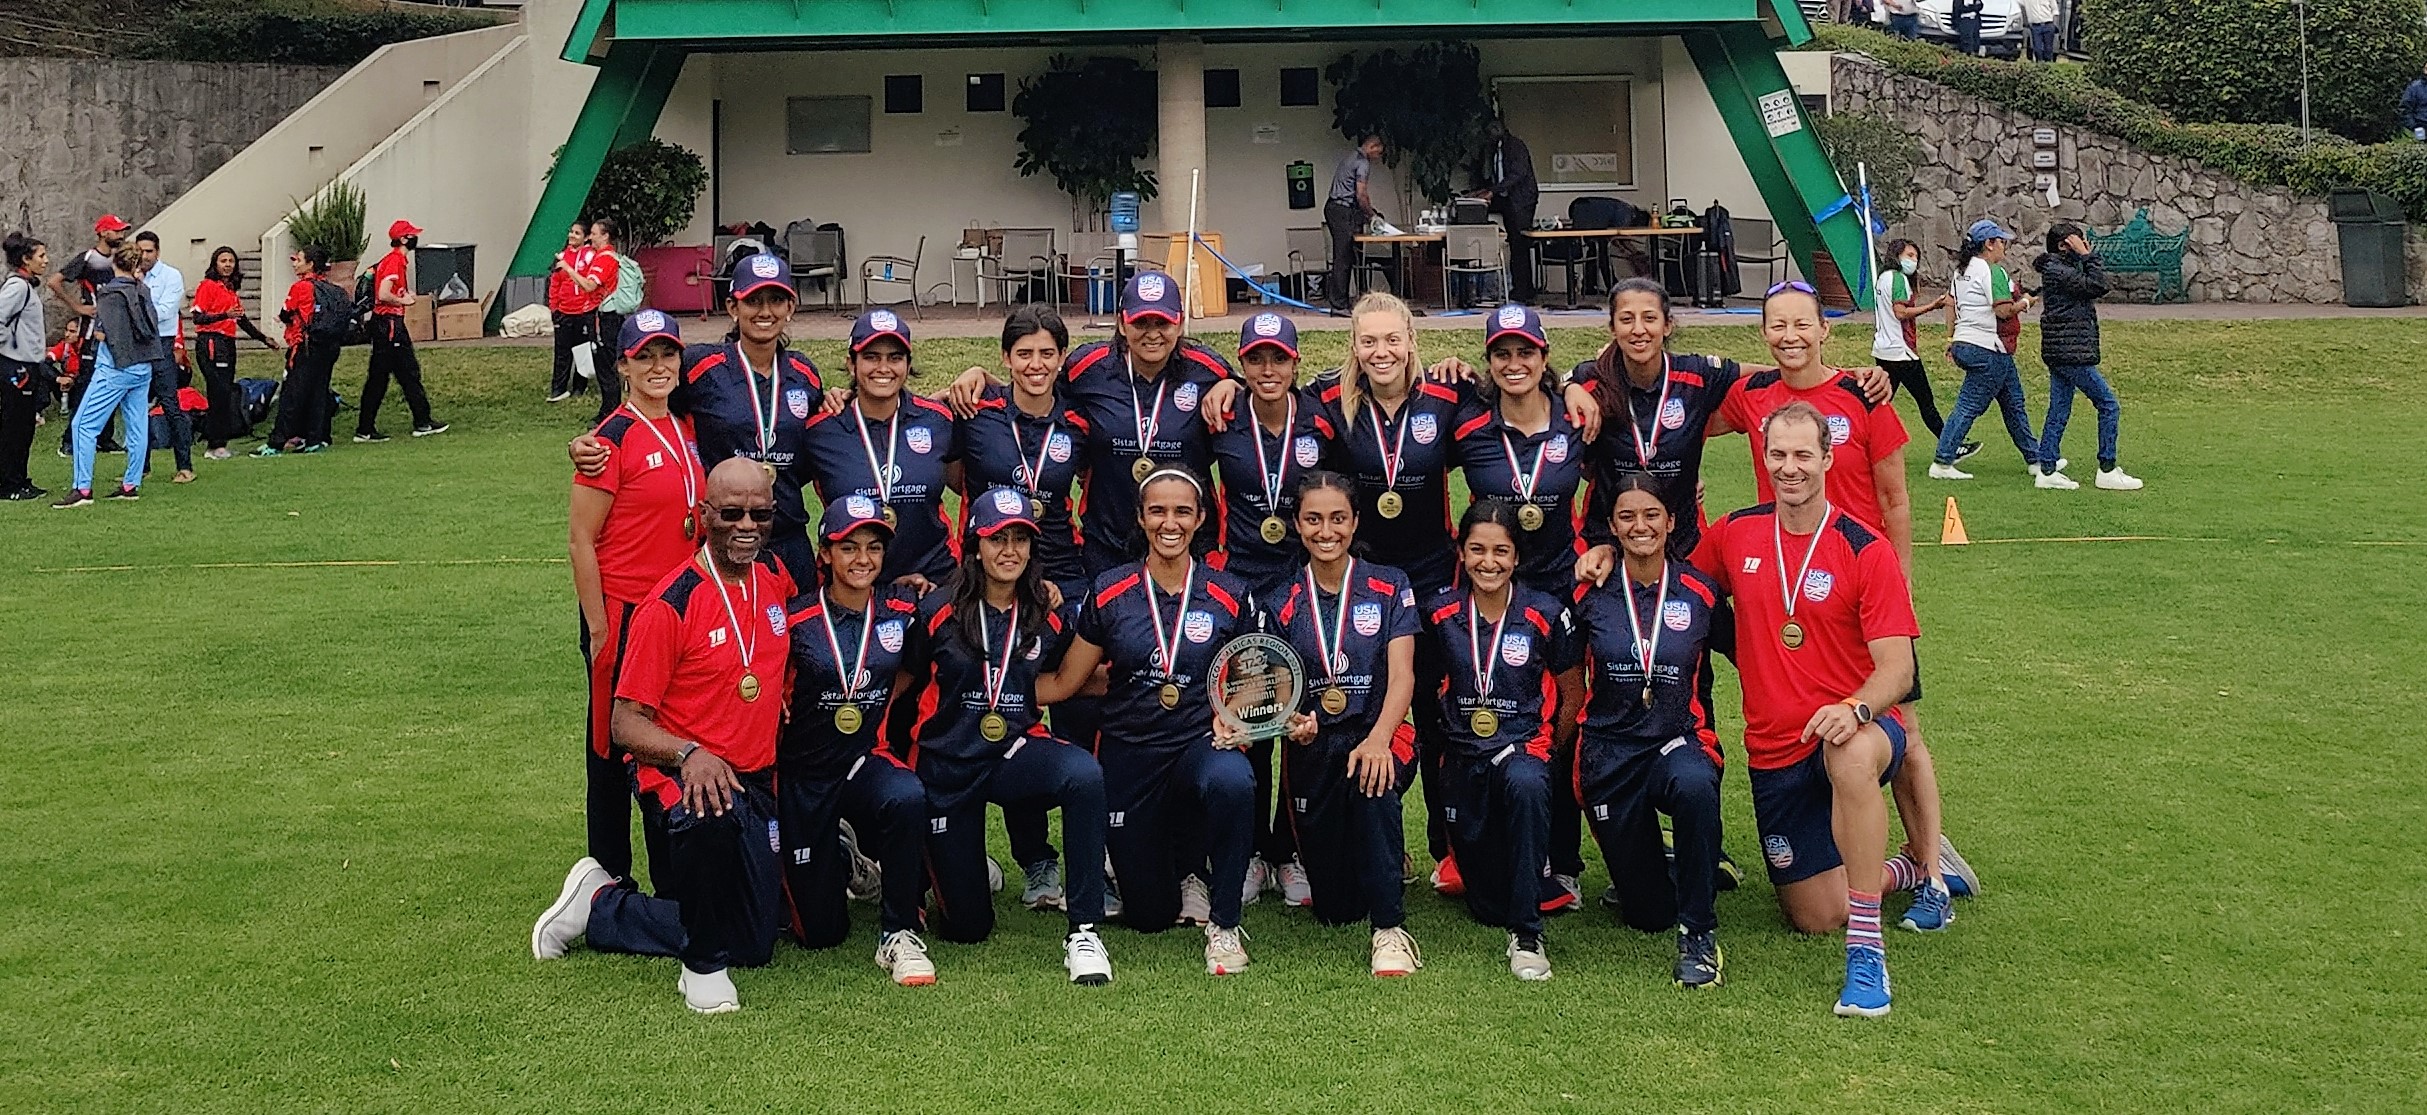 Team USA finish brilliantly as champions of the ICC Americas T20 World Cup Qualifier in Mexico